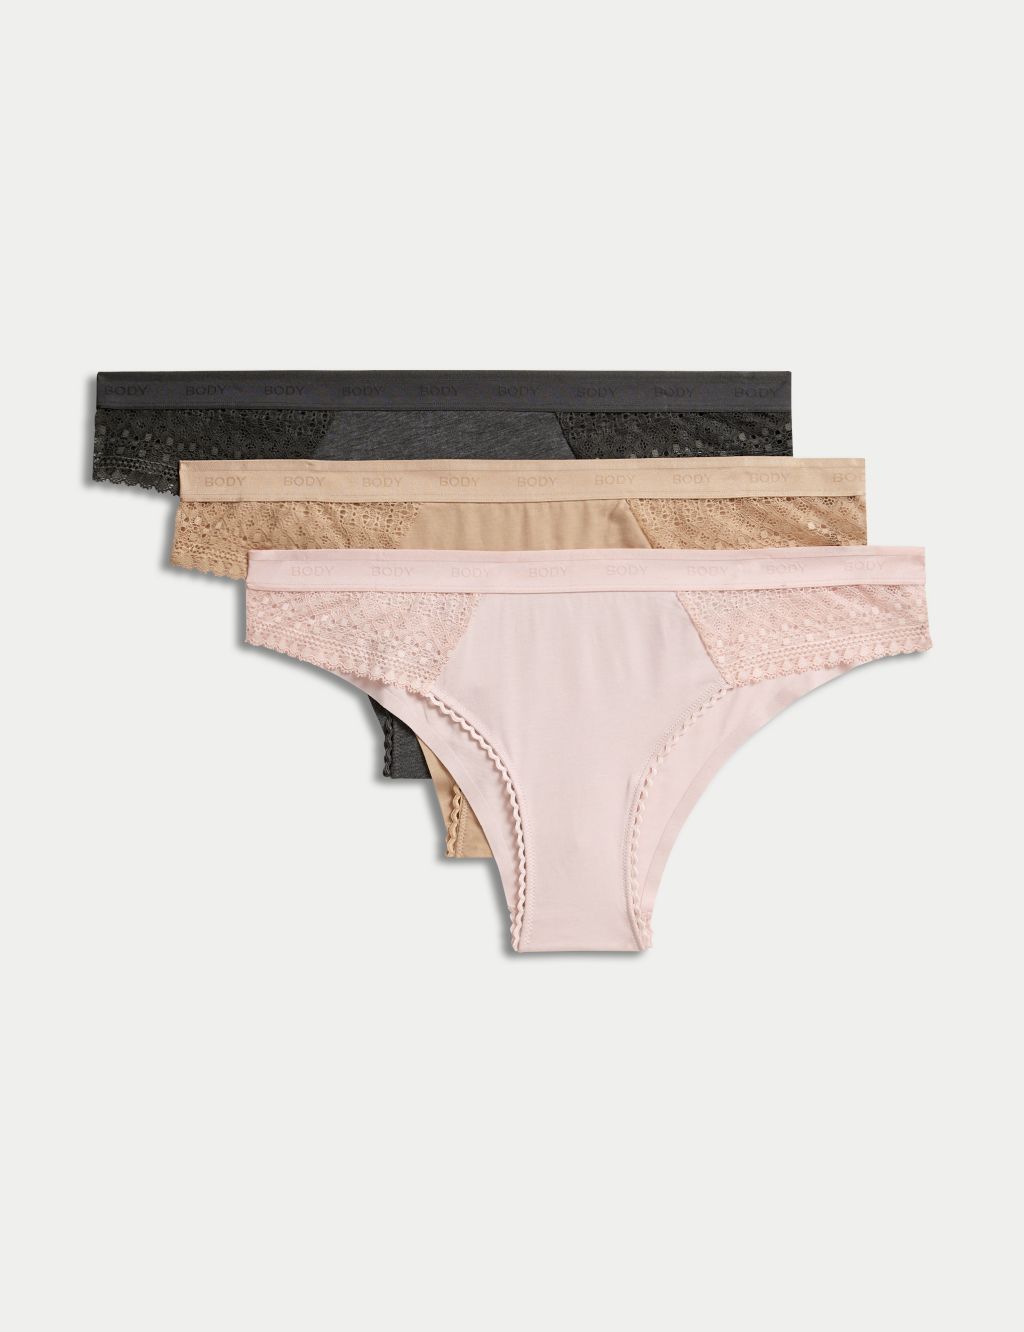 M&S COLLECTION Isabella Lace Praline Brazilian Knickers T61/2119P BNWT  0000020276492 on eBid Canada